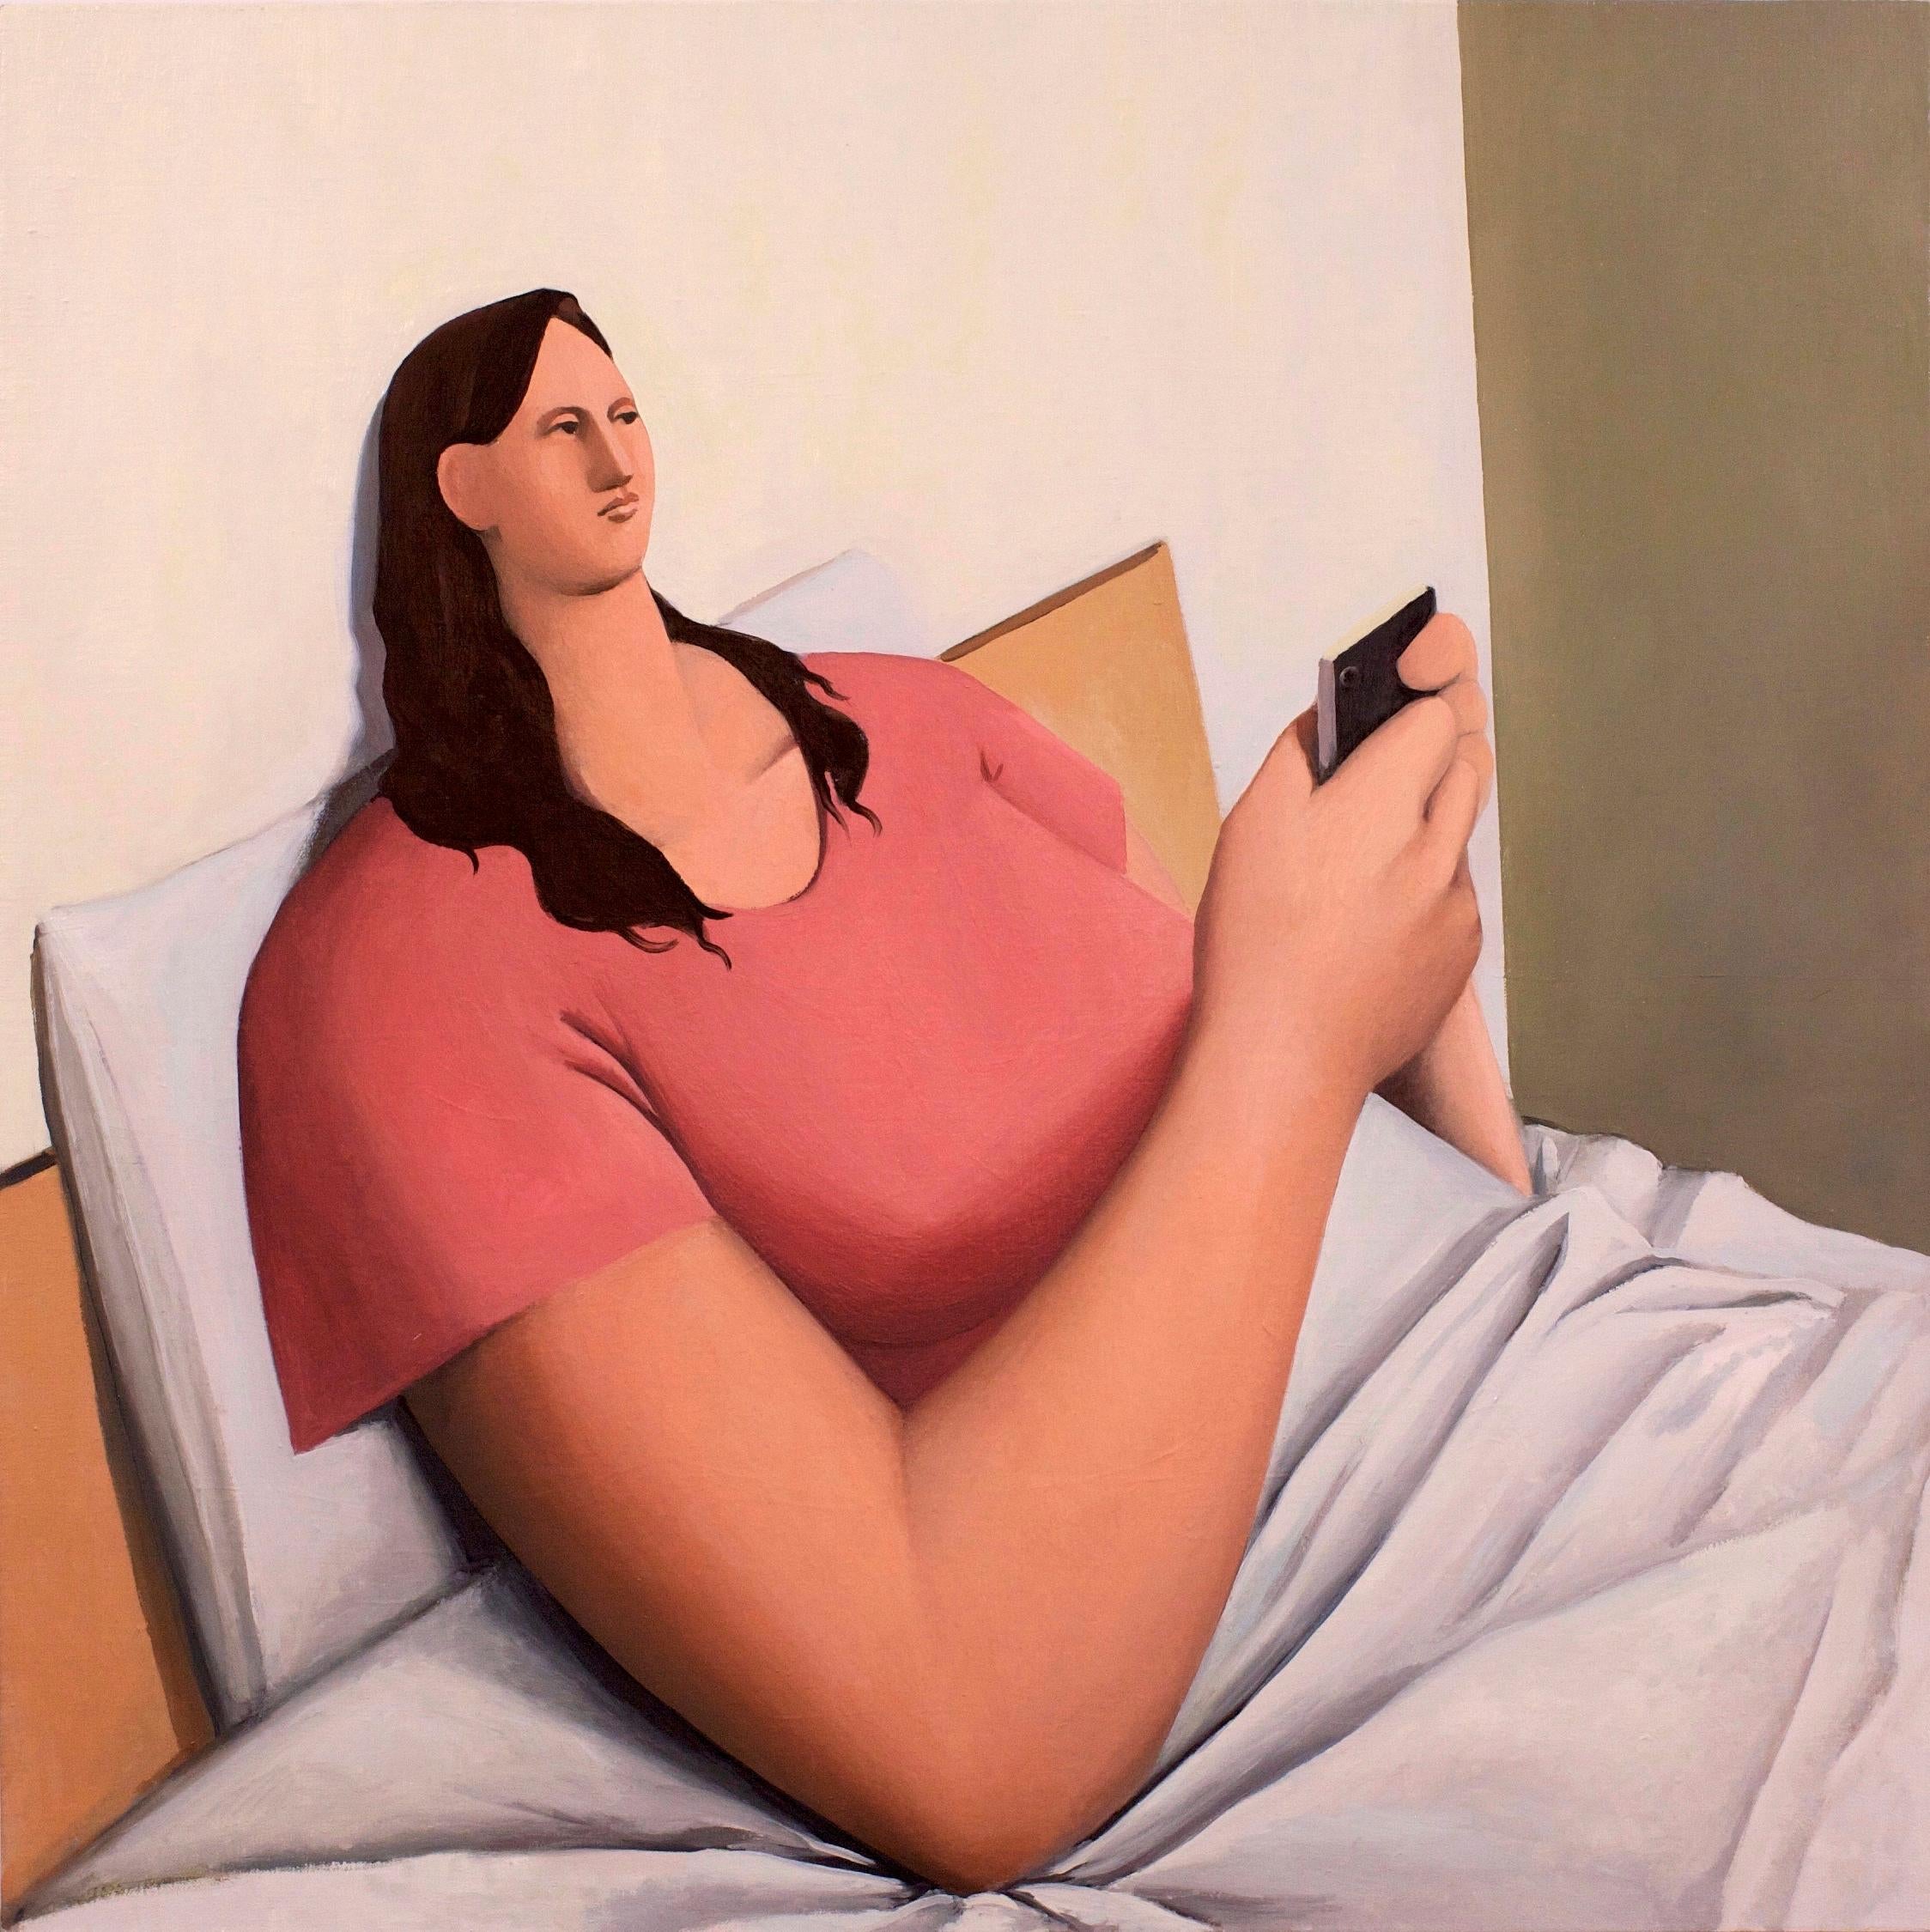 This is an oil painting on linen of a female figure sitting in bed.  This work was exhibited at our gallery during the summer exhibition, Summertime Sadness. The works were well received and two articles were published about the exhibition.